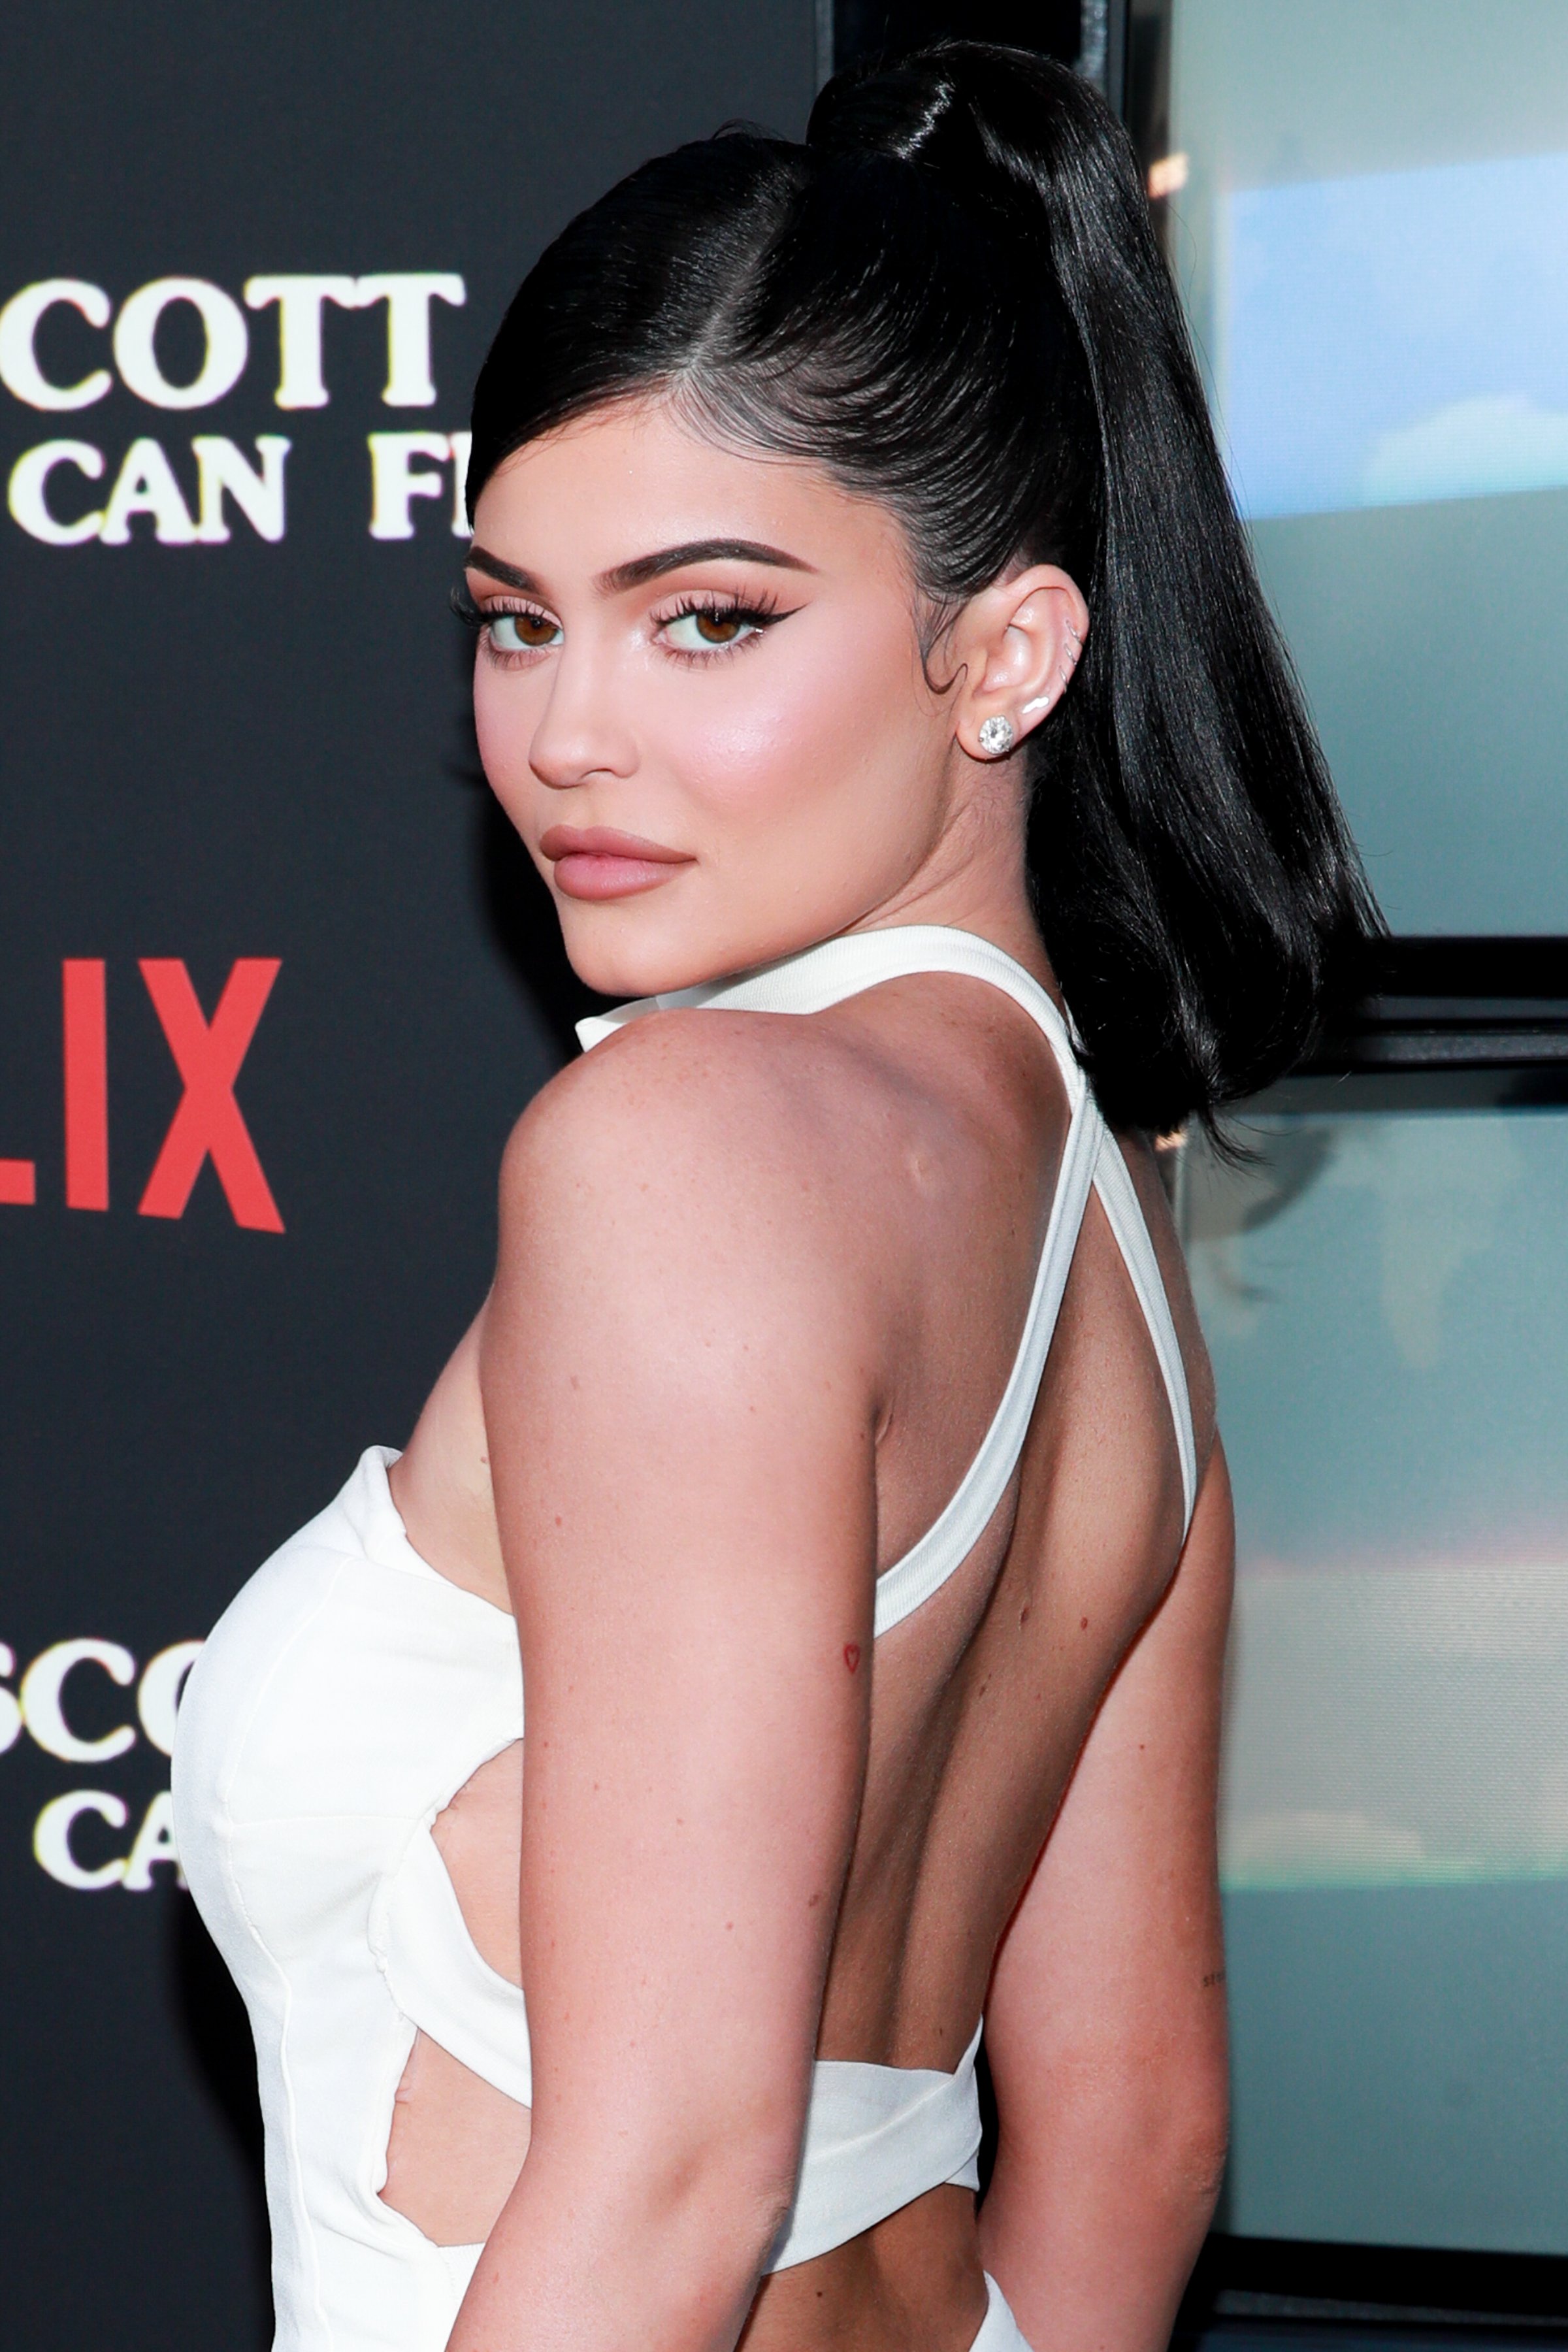 Kylie Jenner attends the premiere of "Travis Scott: Look Mom I Can Fly" in Santa Monica, California on August 27, 2019 | Photo: Getty Images